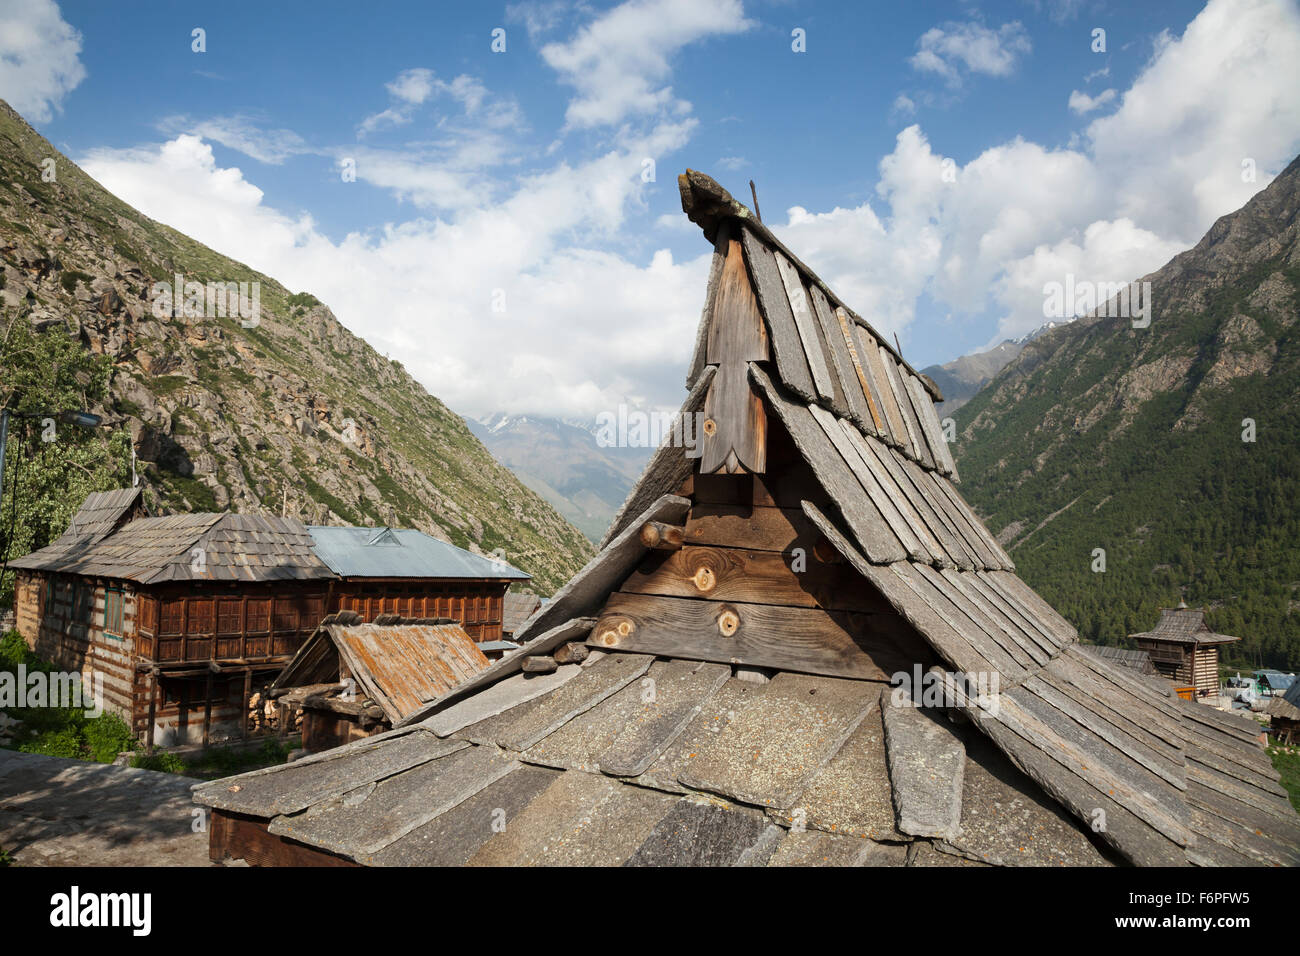 The village of Chitkul at the last inhabited village on the Indo-China border Himachal Pradesh, Northern India Stock Photo